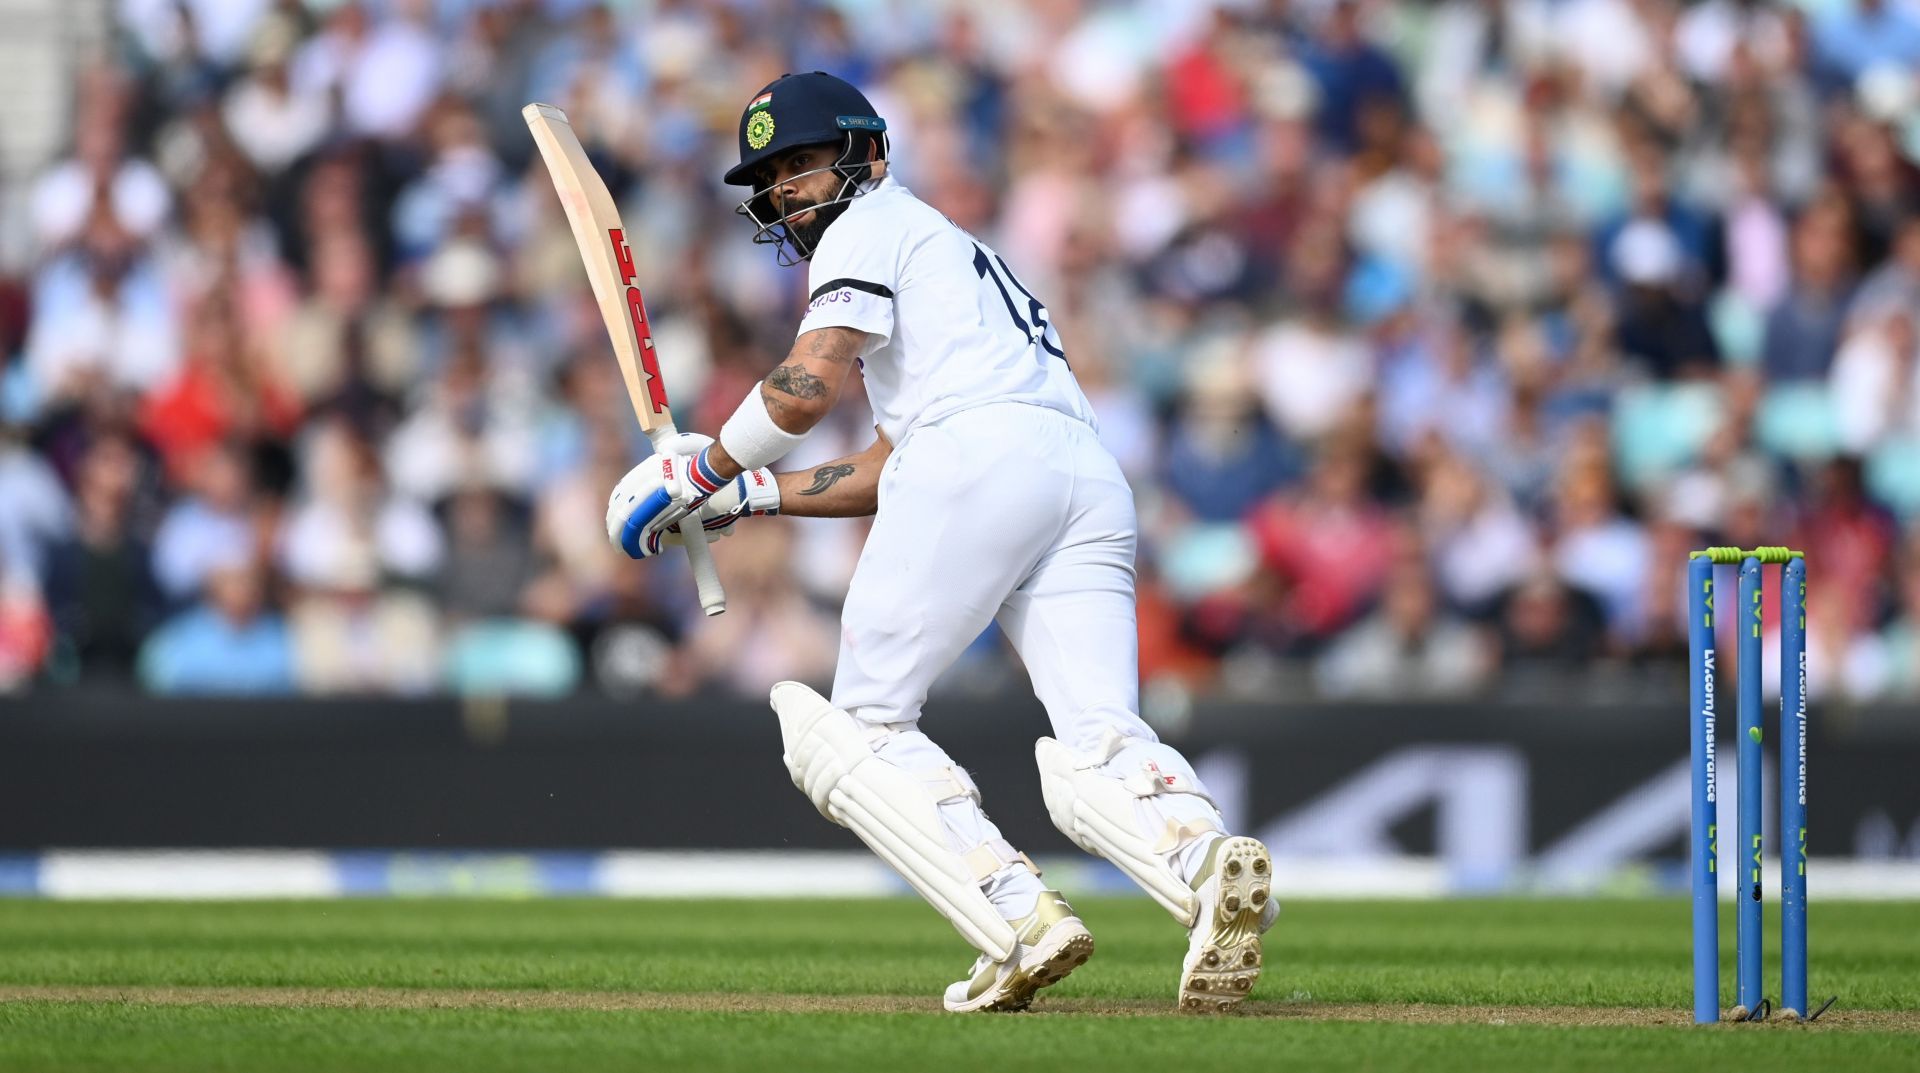 Kohli dominated with the bat as Indian captain